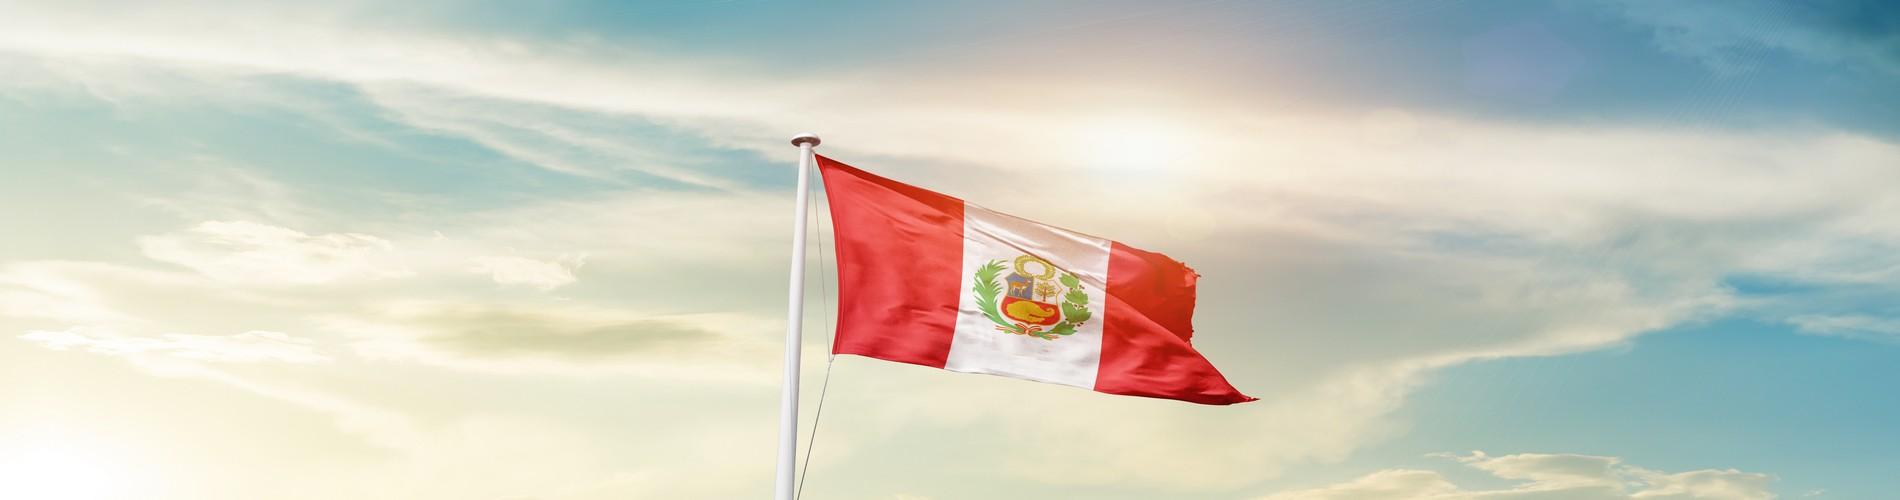 CURRENCY EXCHANGE IN PERU: A GUIDE FOR CANADIAN, AMERICAN, AND AUSTRALIAN DOLLARS